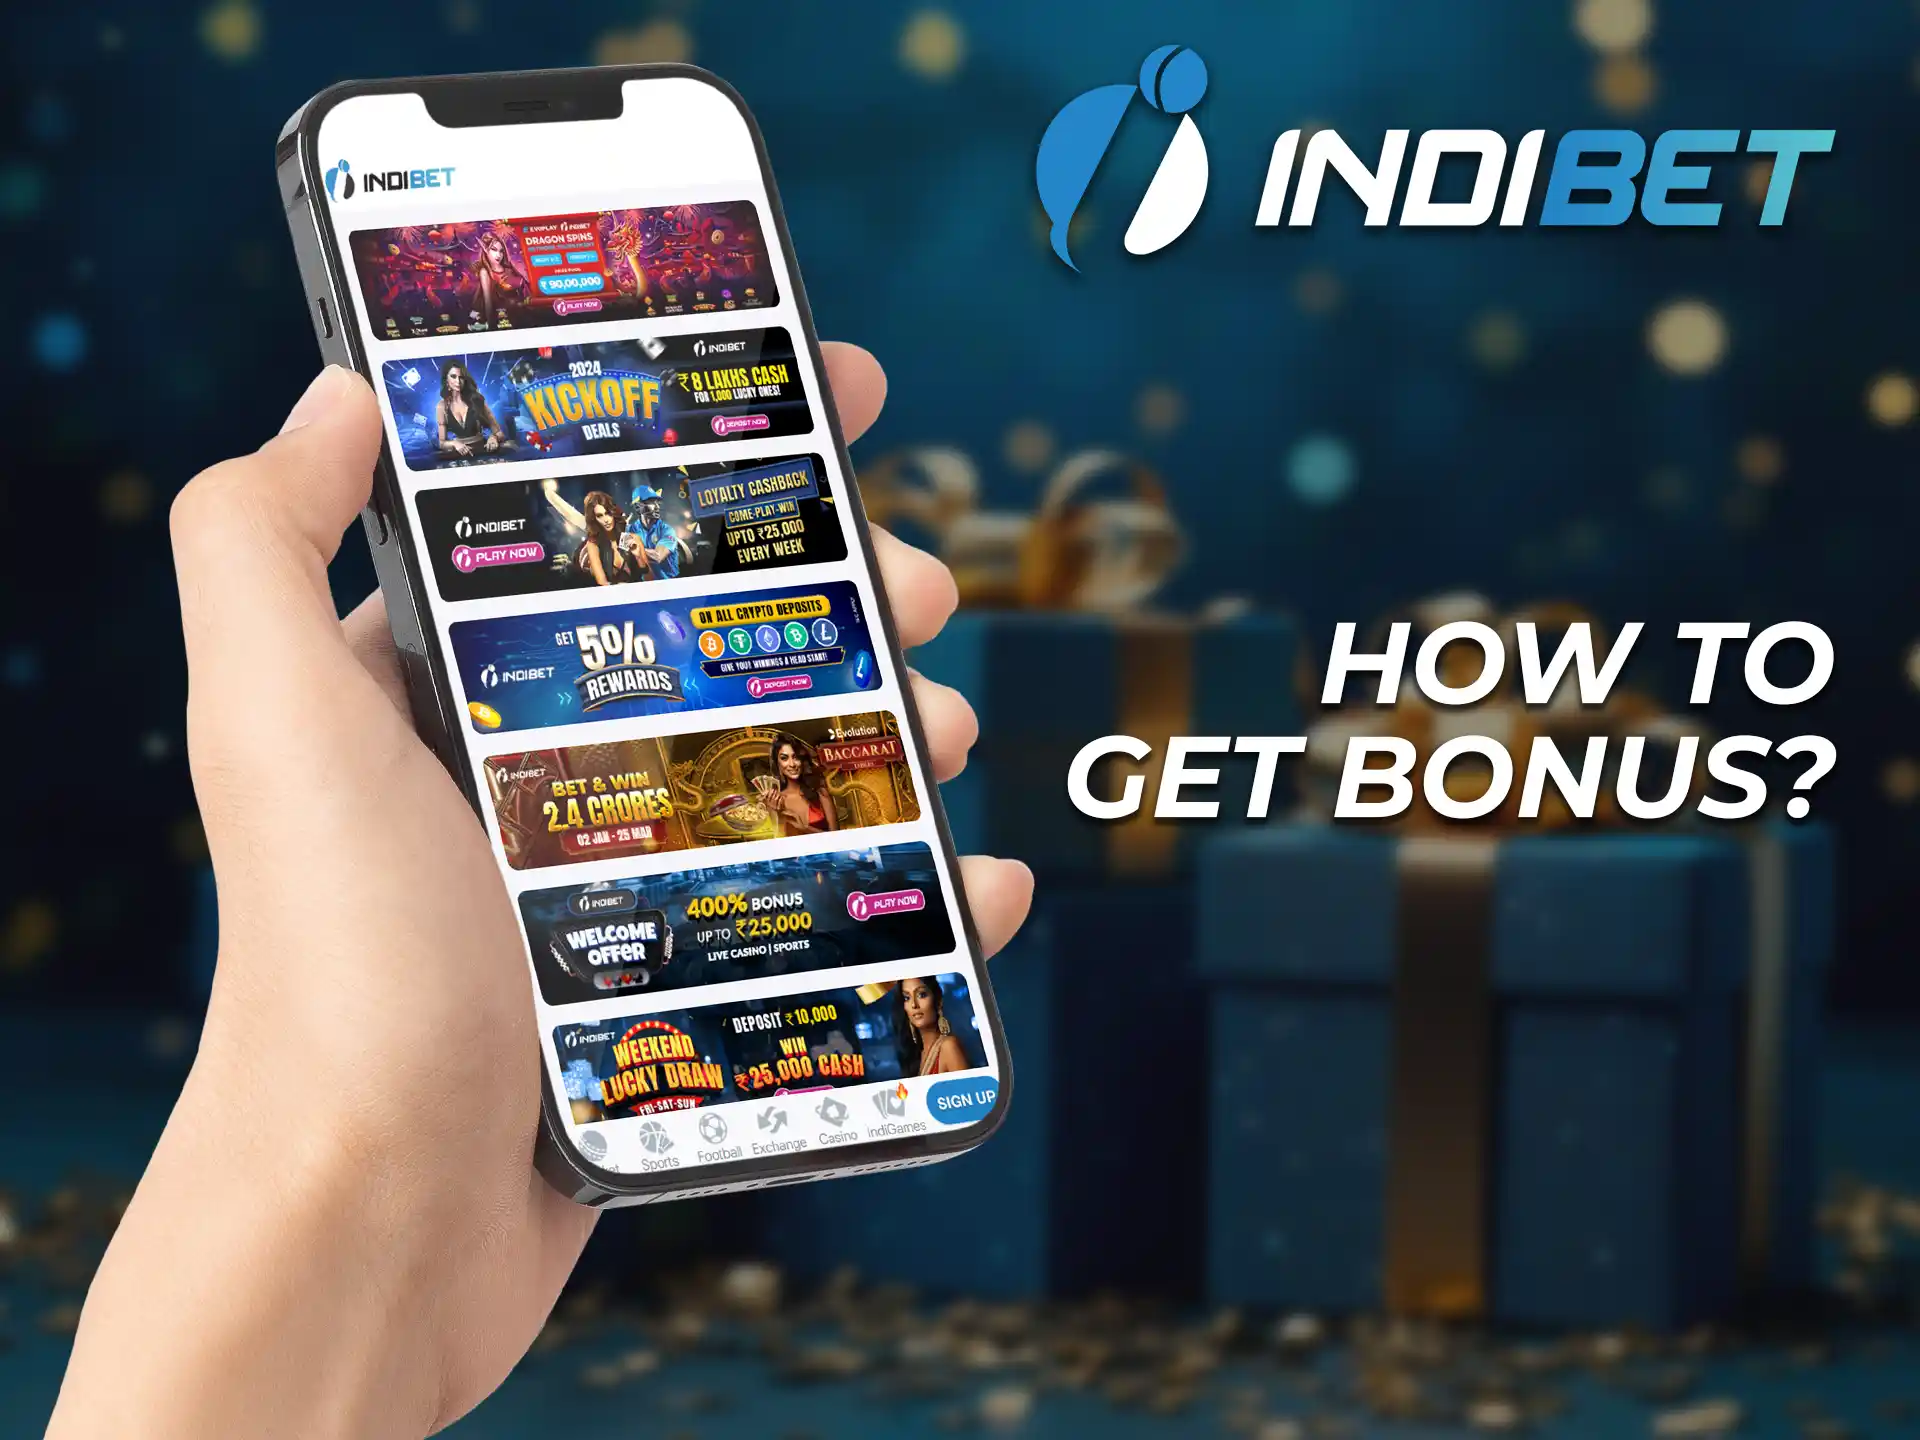 To get the welcome bonus on the Indibet mobile app follow a few steps.